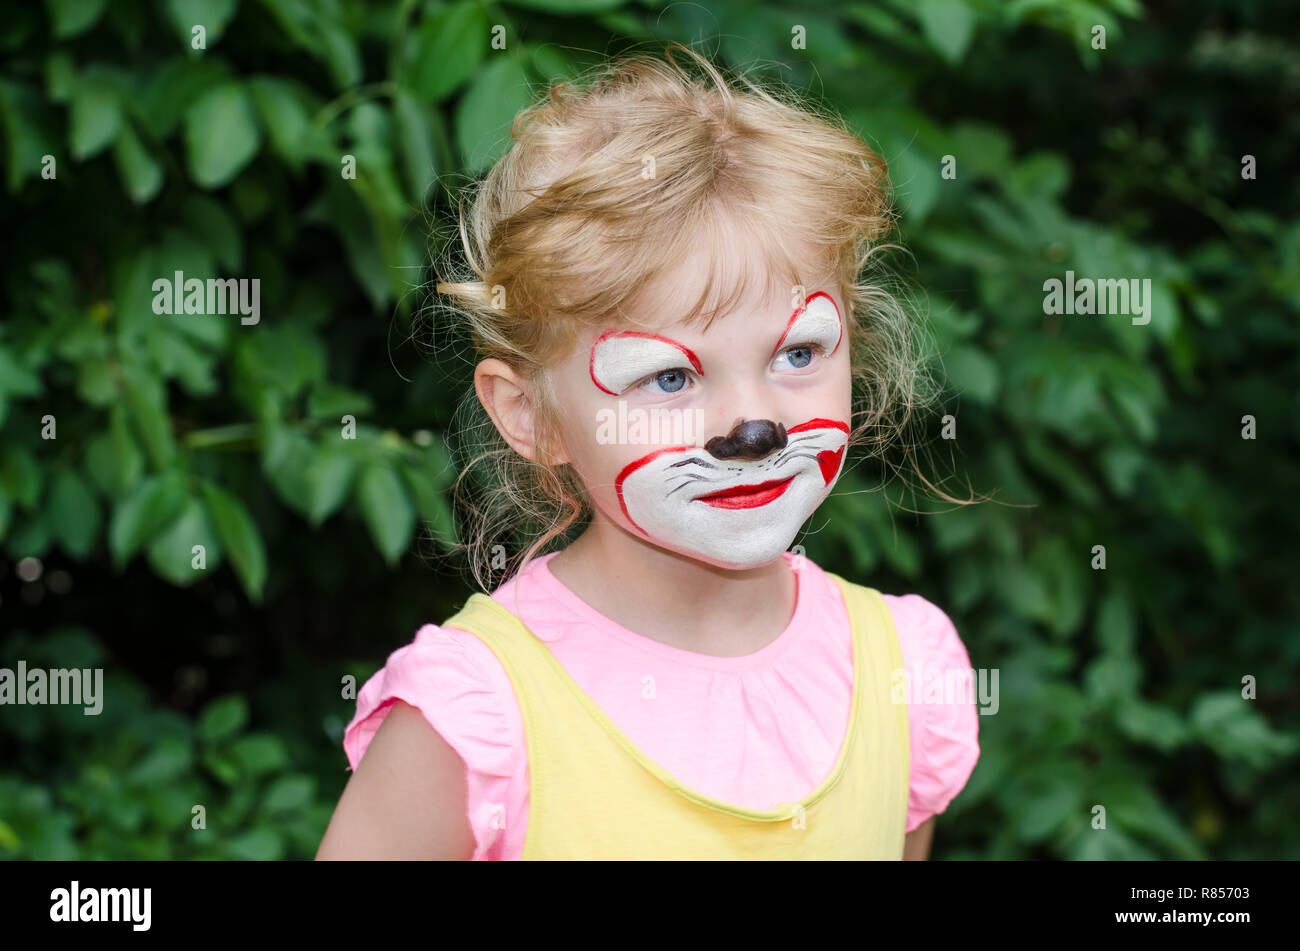 blond girl with face painting Stock Photo